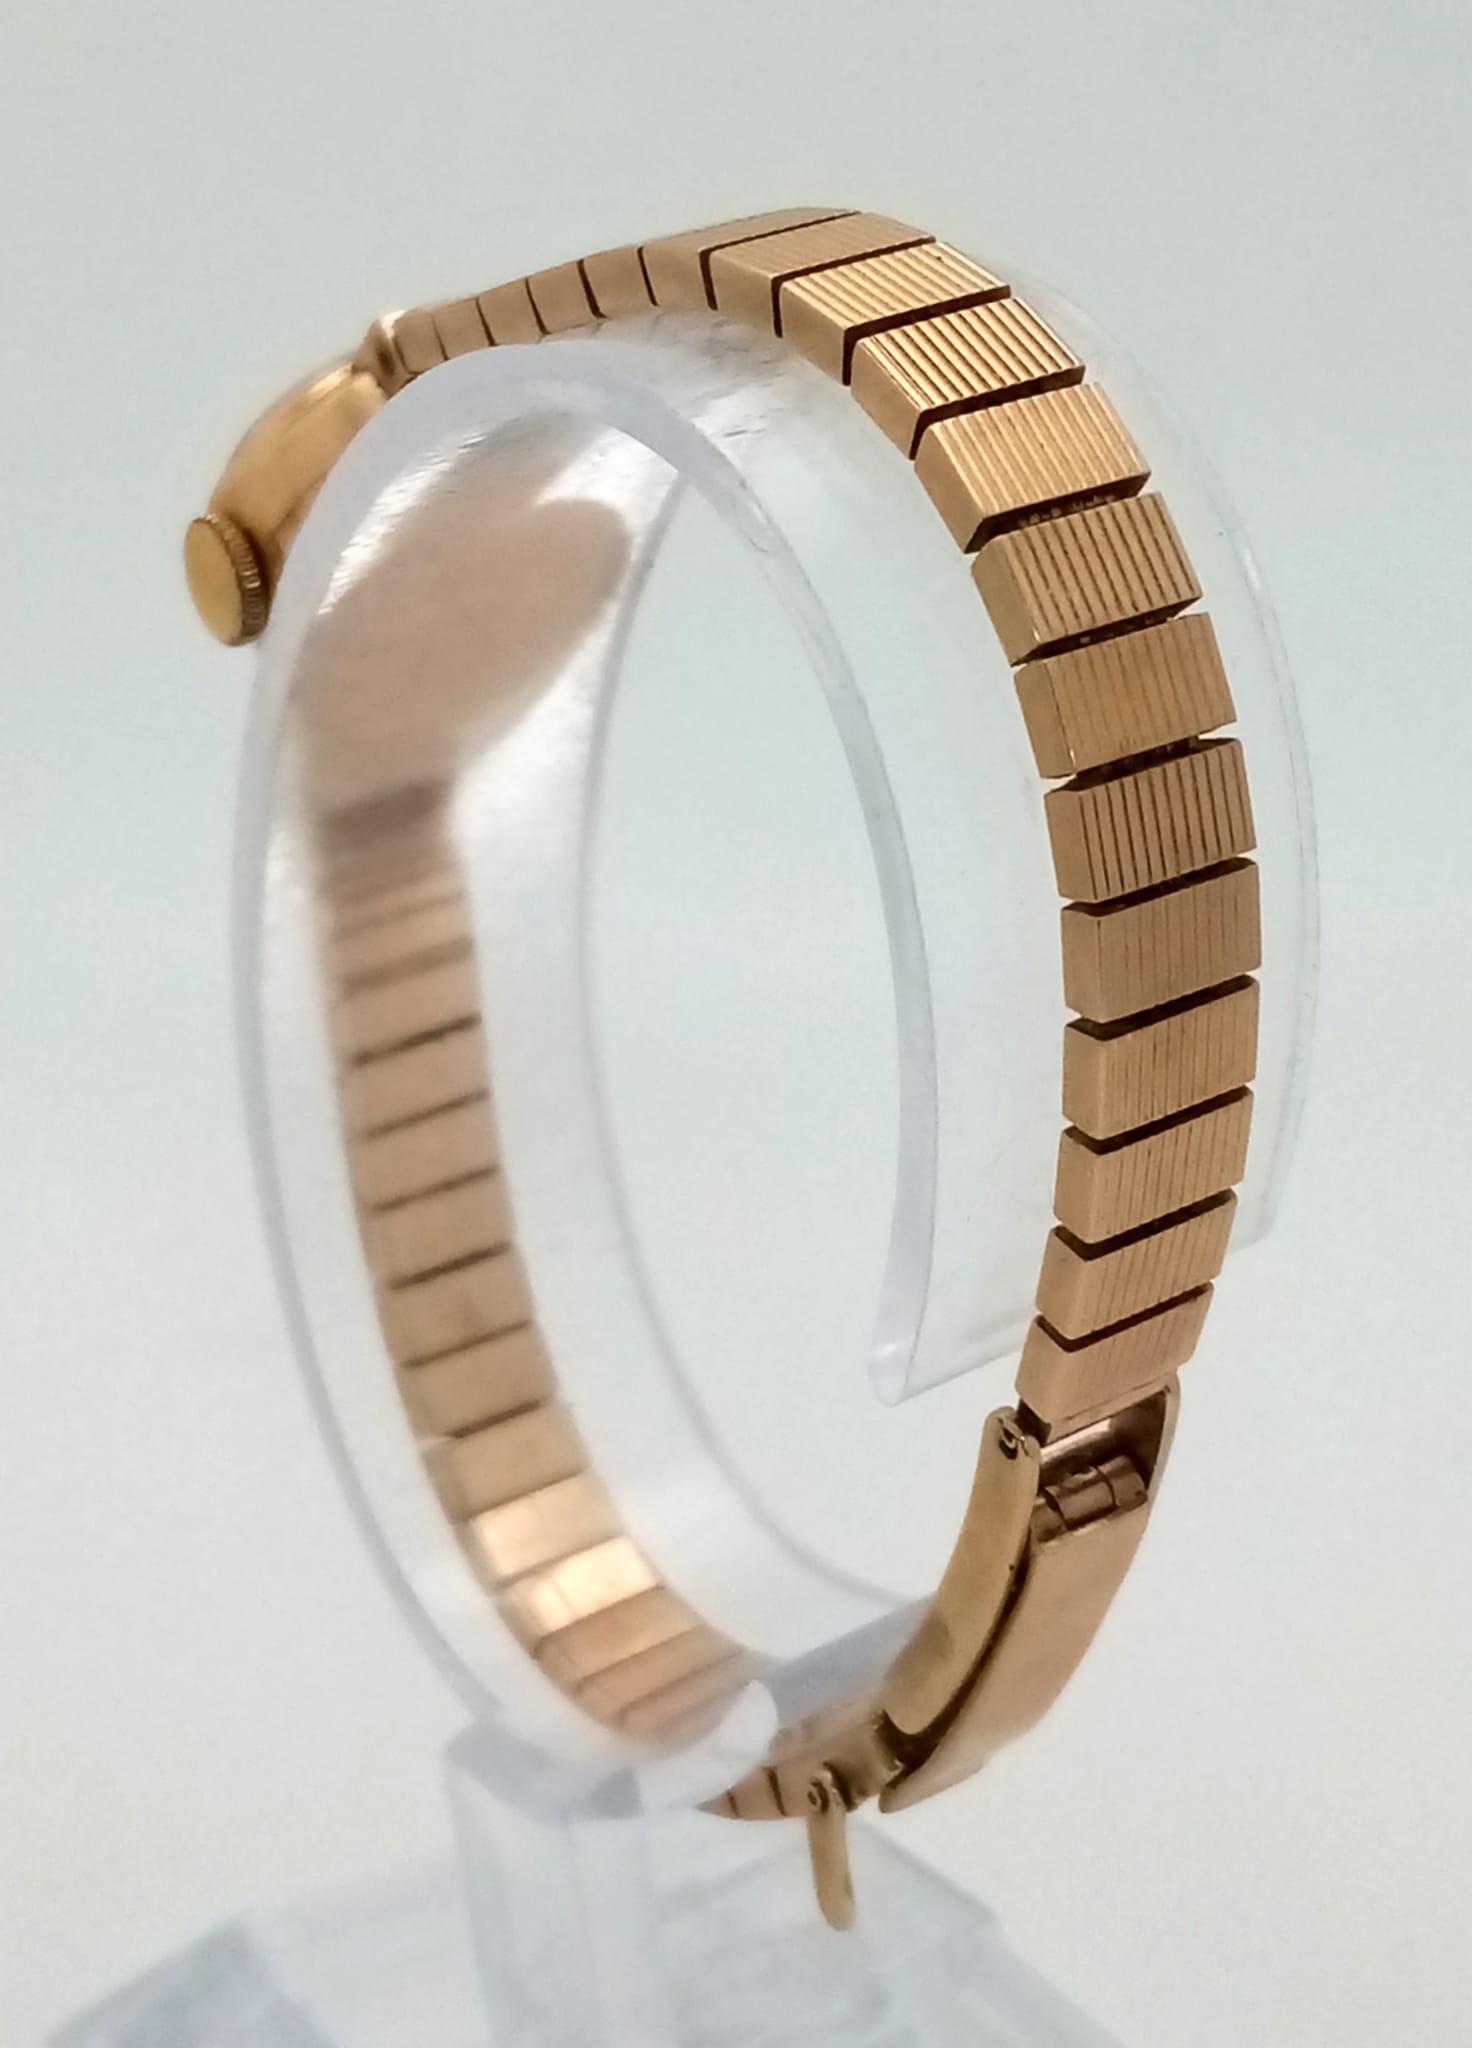 A Vintage 9K Yellow Gold Verity Ladies Watch. 9K gold bracelet and 9K gold oval case - 15mm. - Image 3 of 7